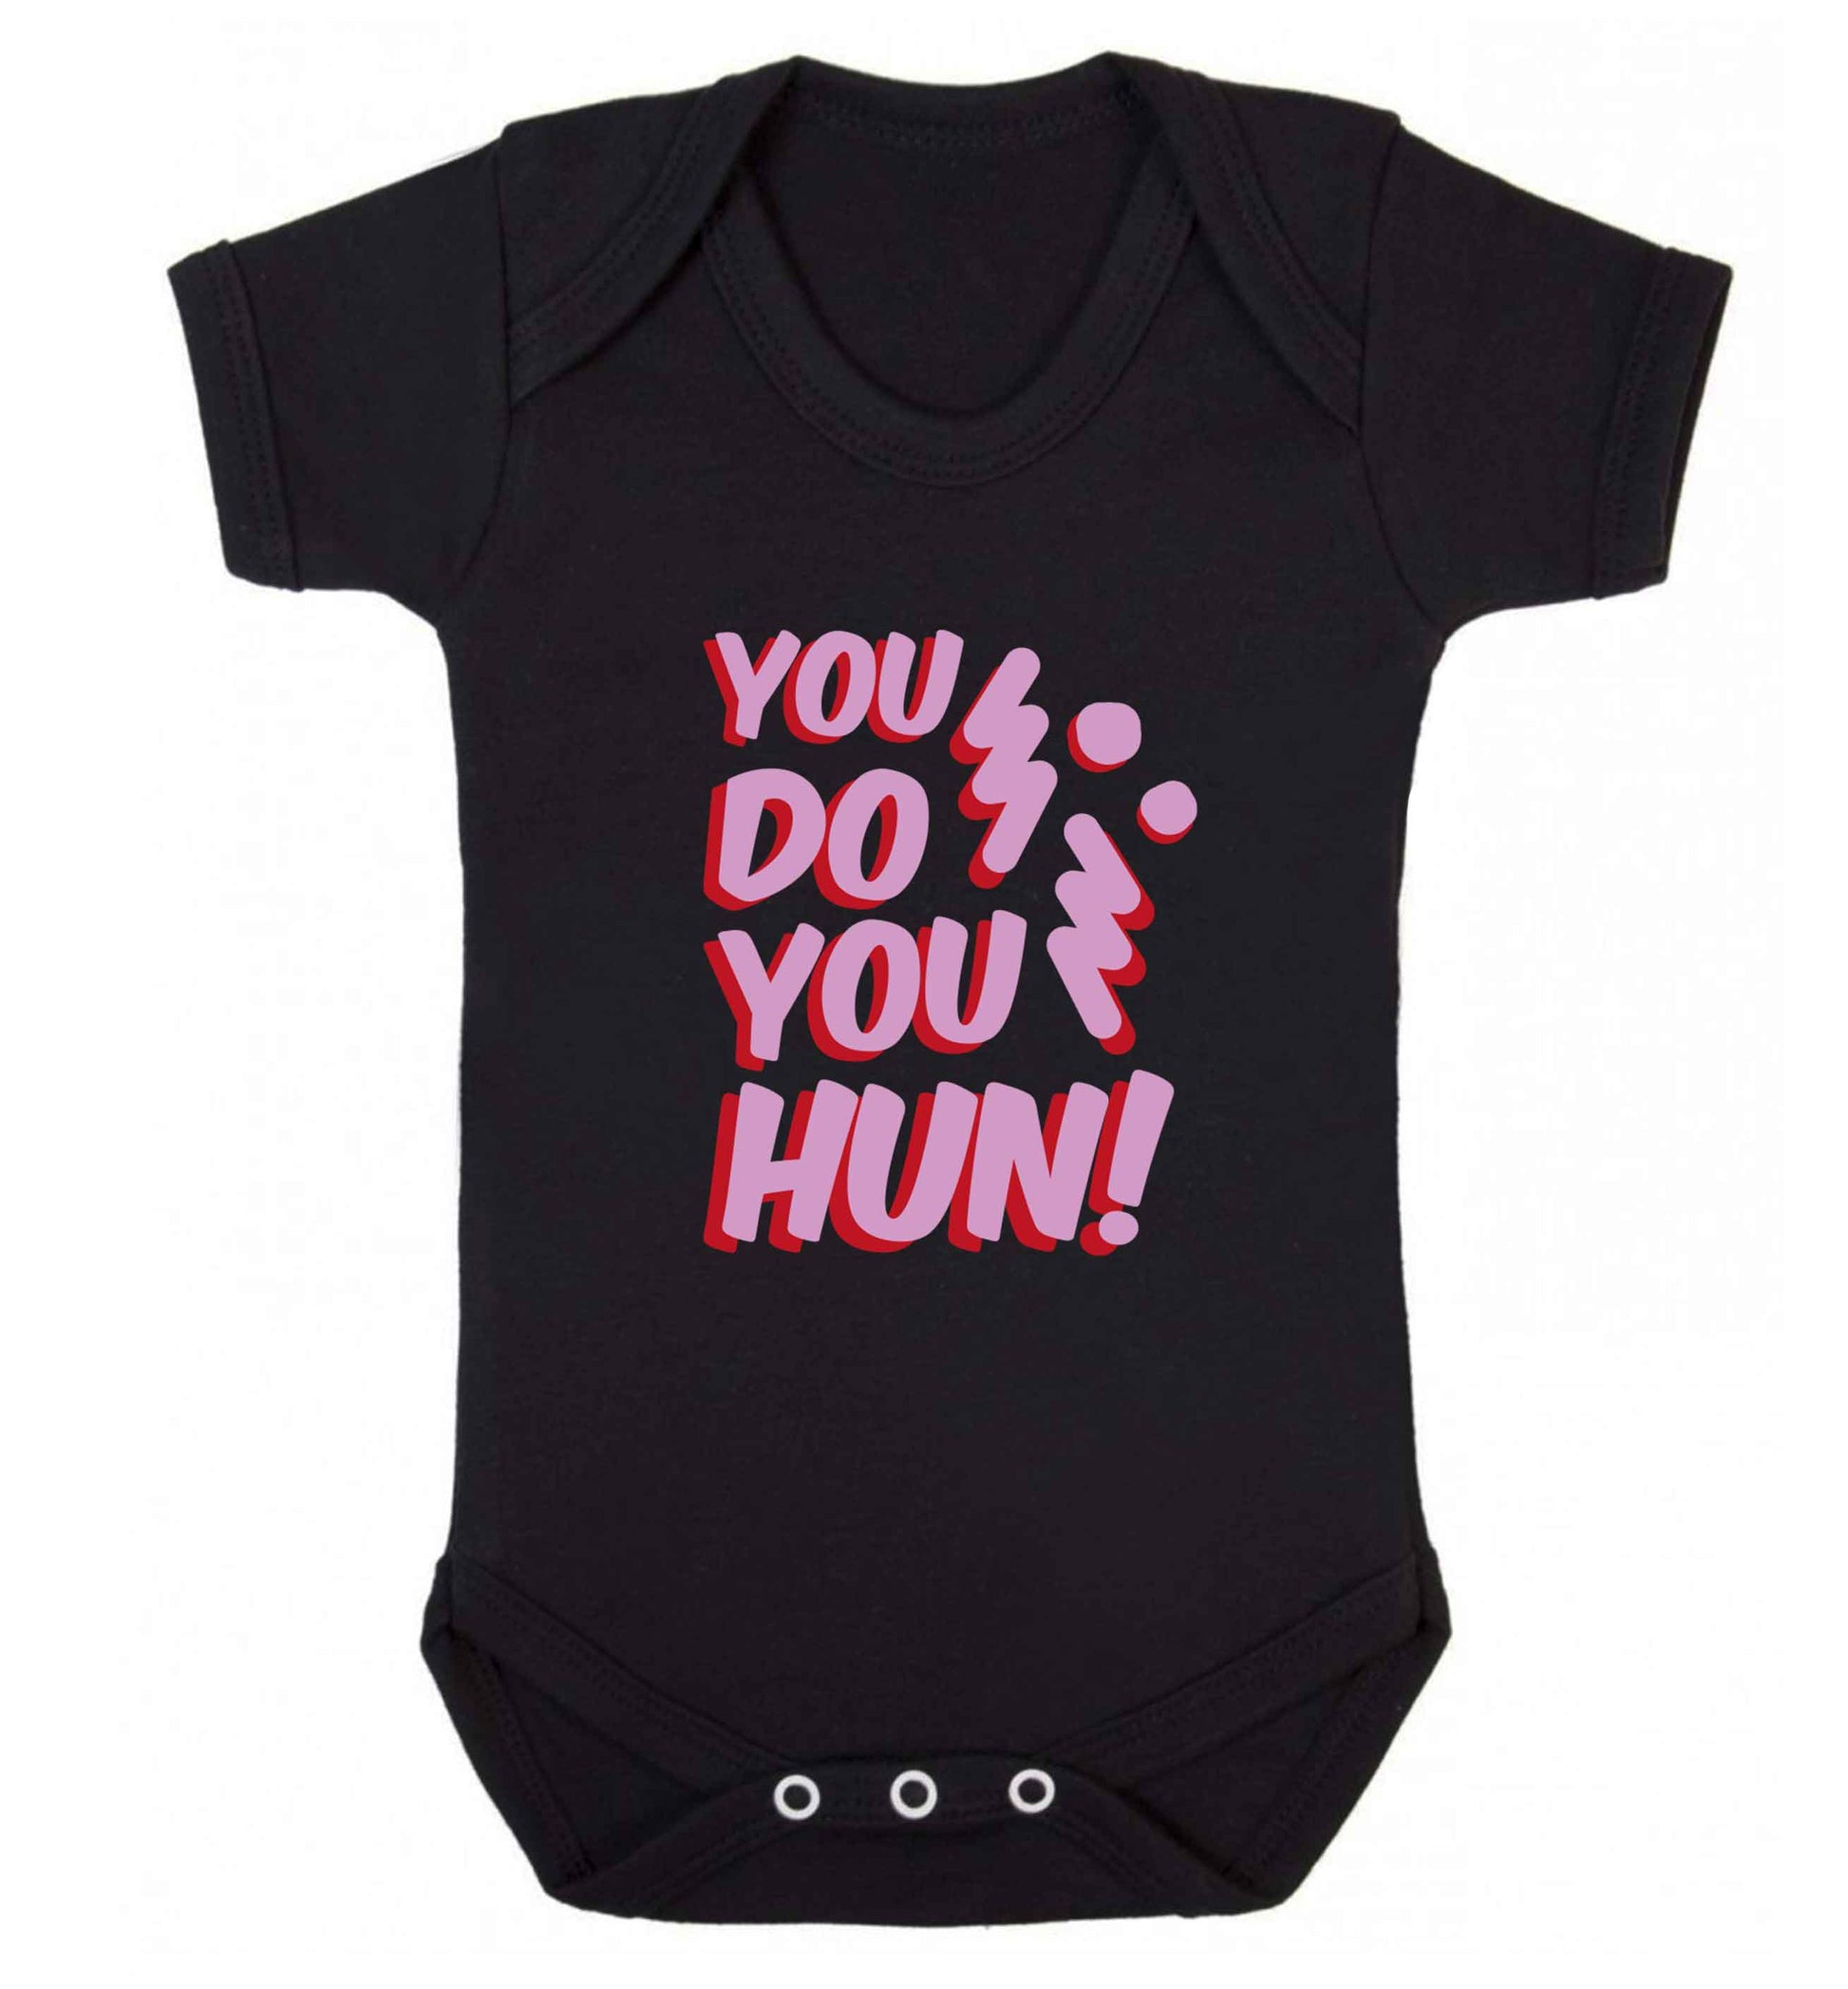 You do you hun baby vest black 18-24 months